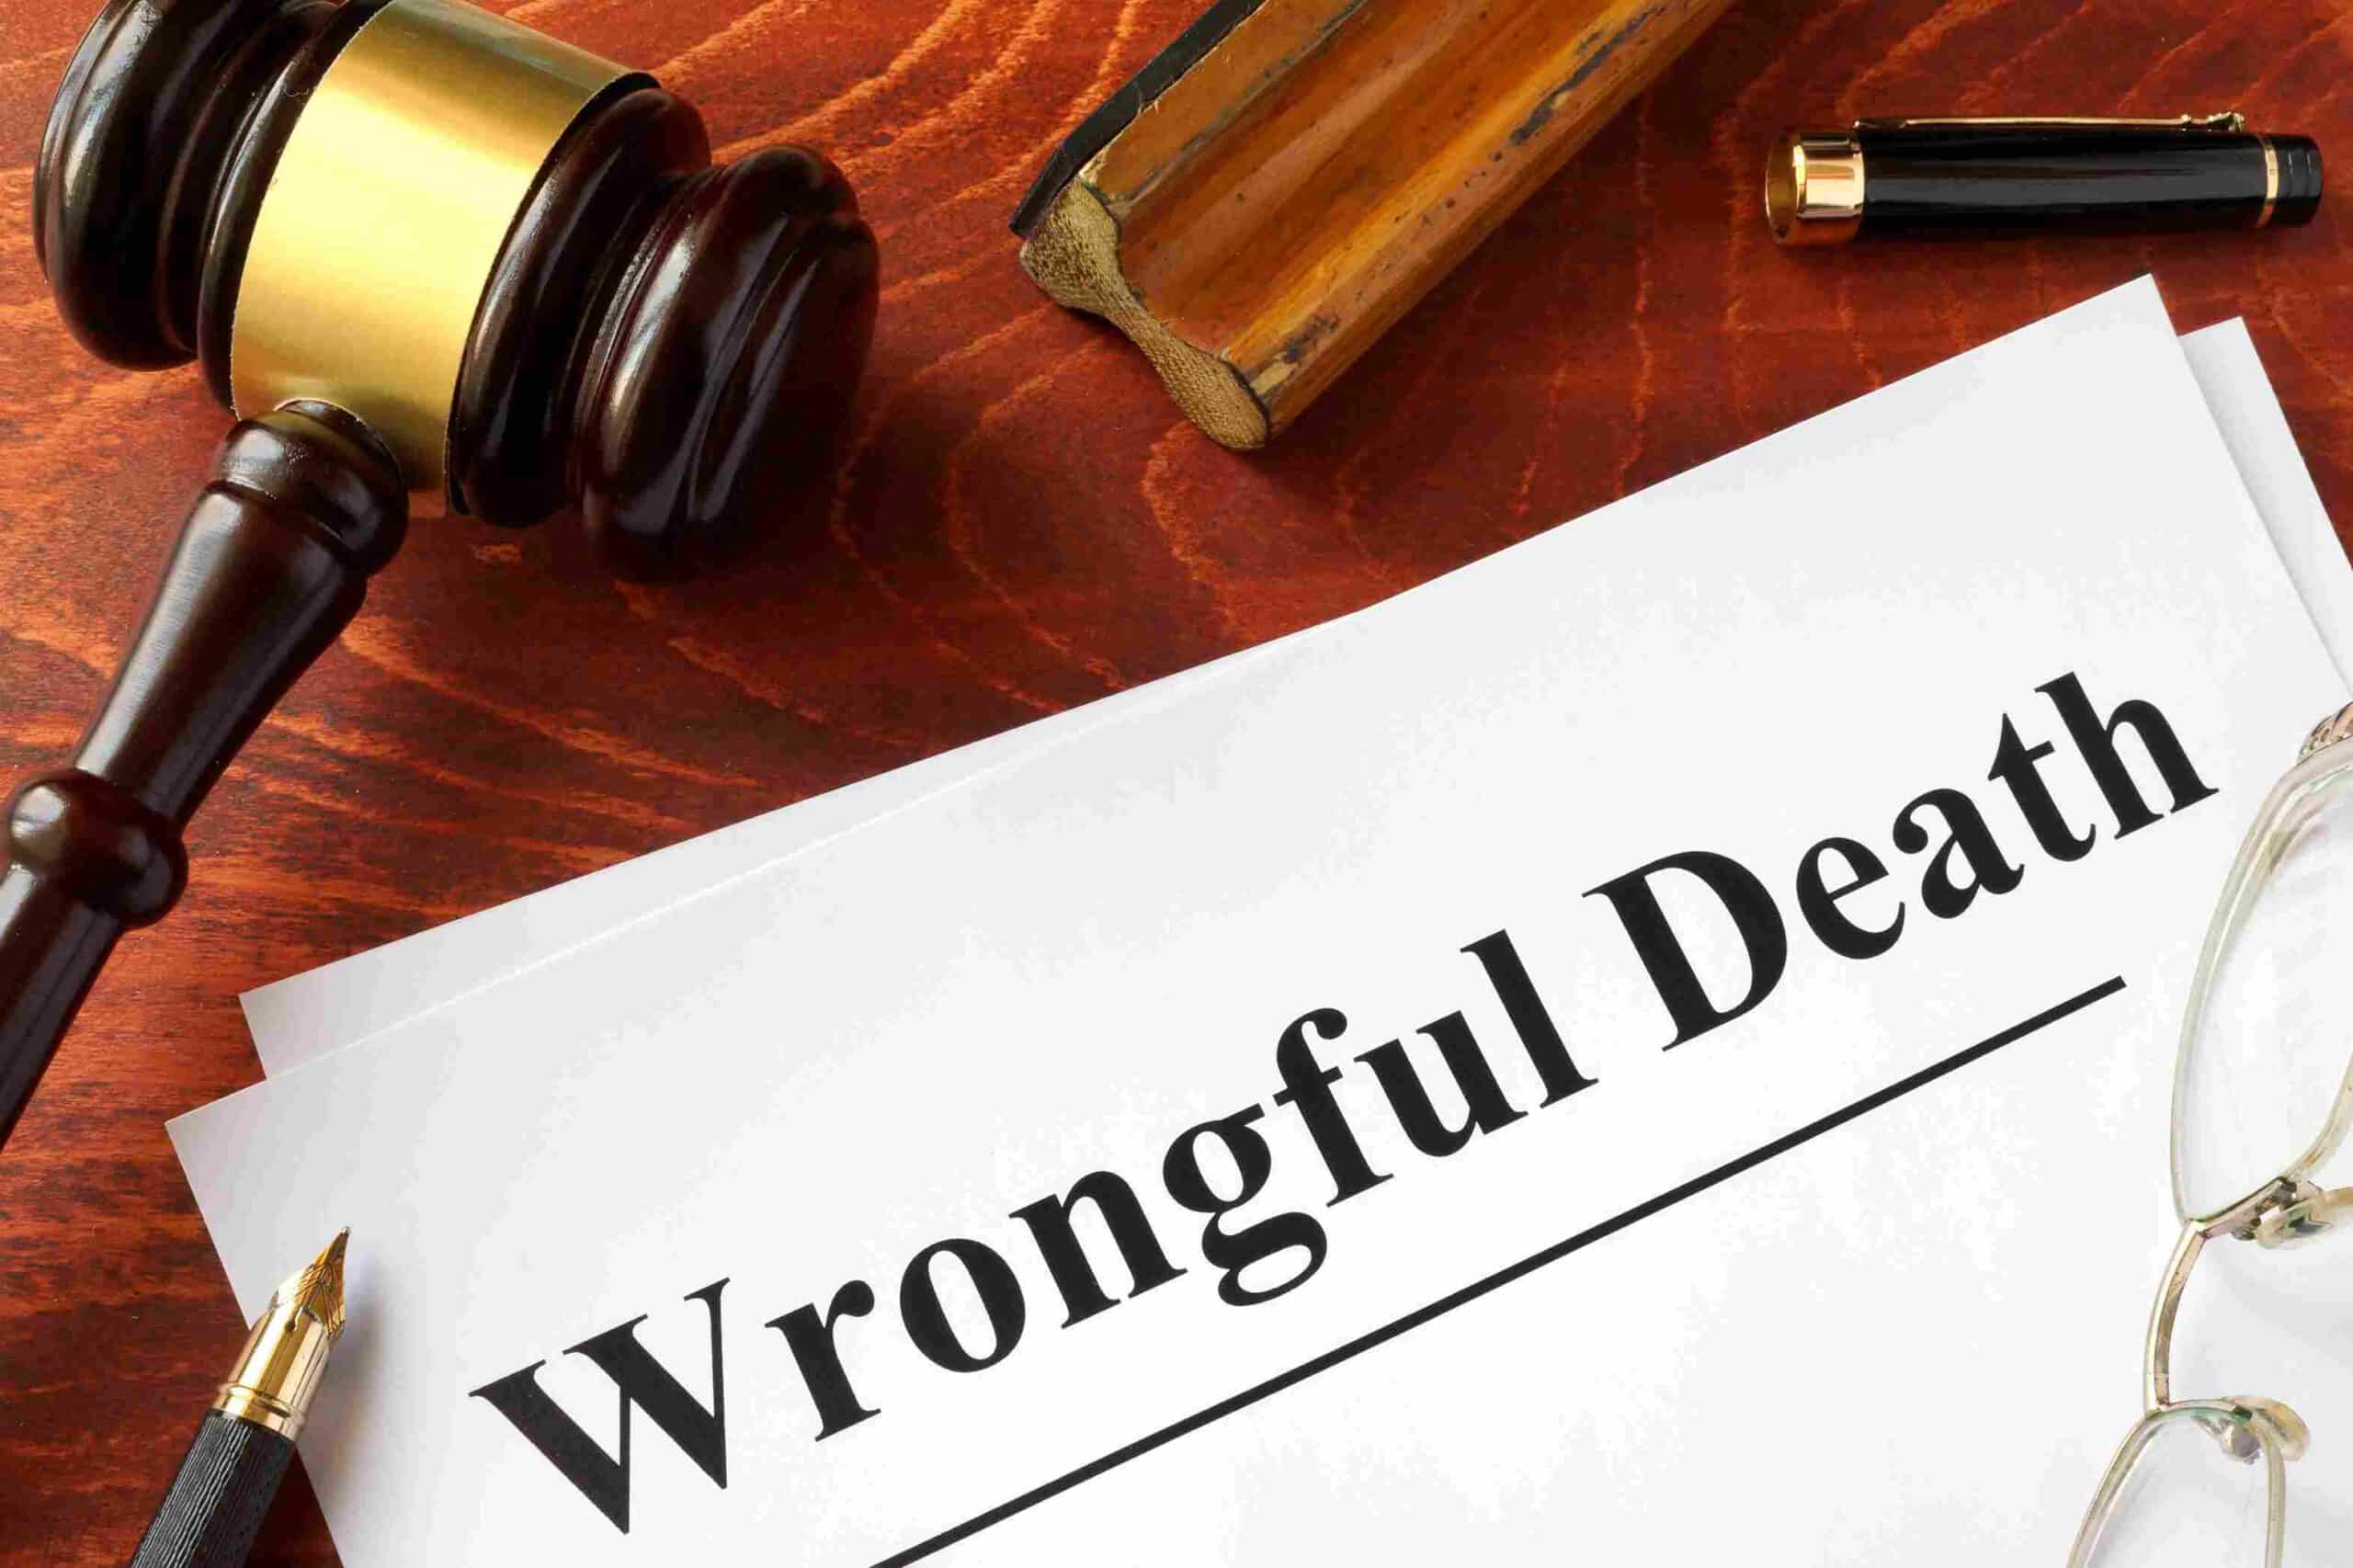 Who Can File a Wrongful Death Claim in Corpus Christi?